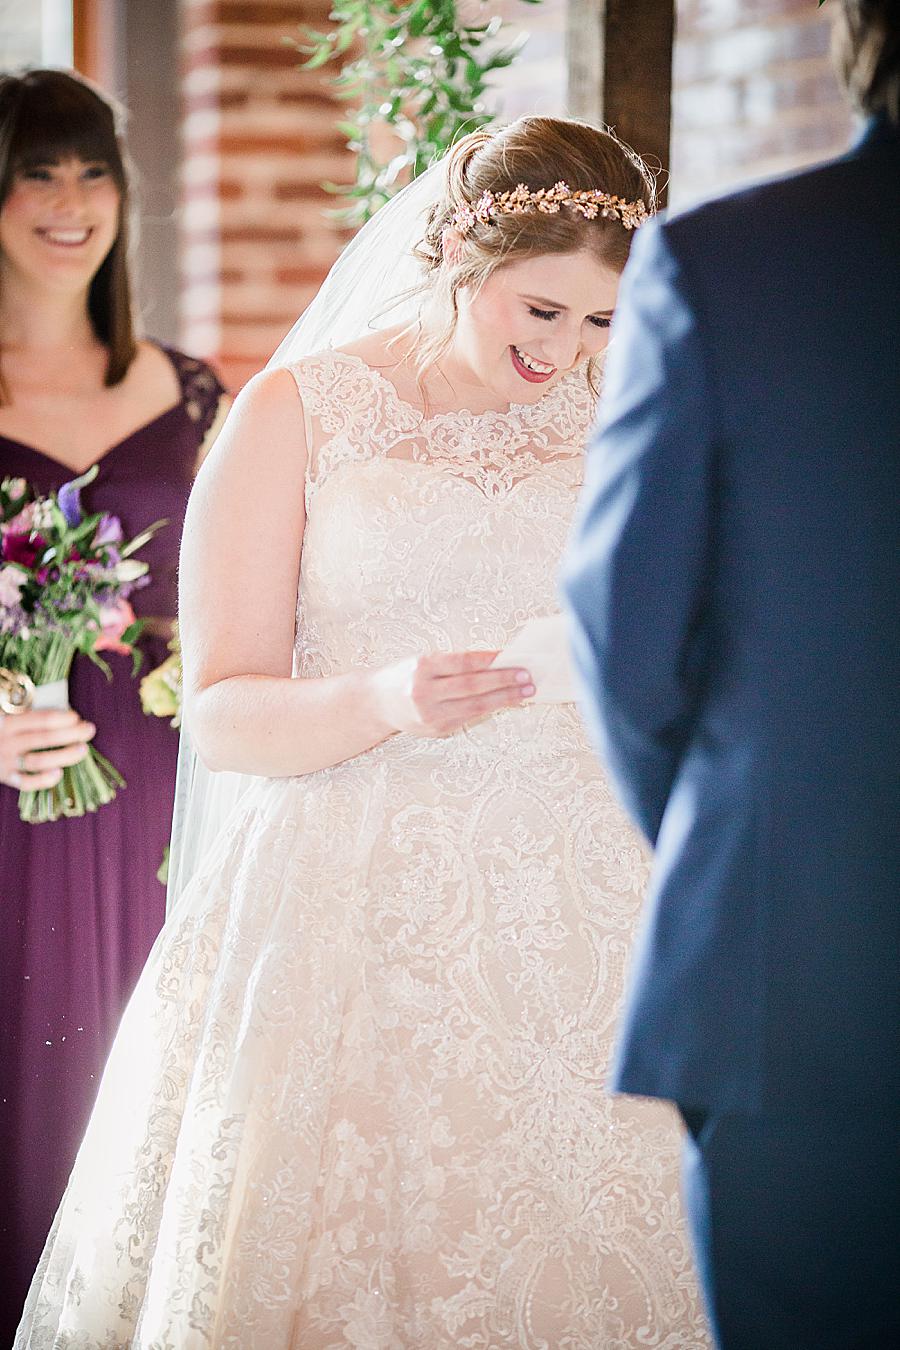 Handwritten vows at this Relix Theater Wedding by Knoxville Wedding Photographer, Amanda May Photos.